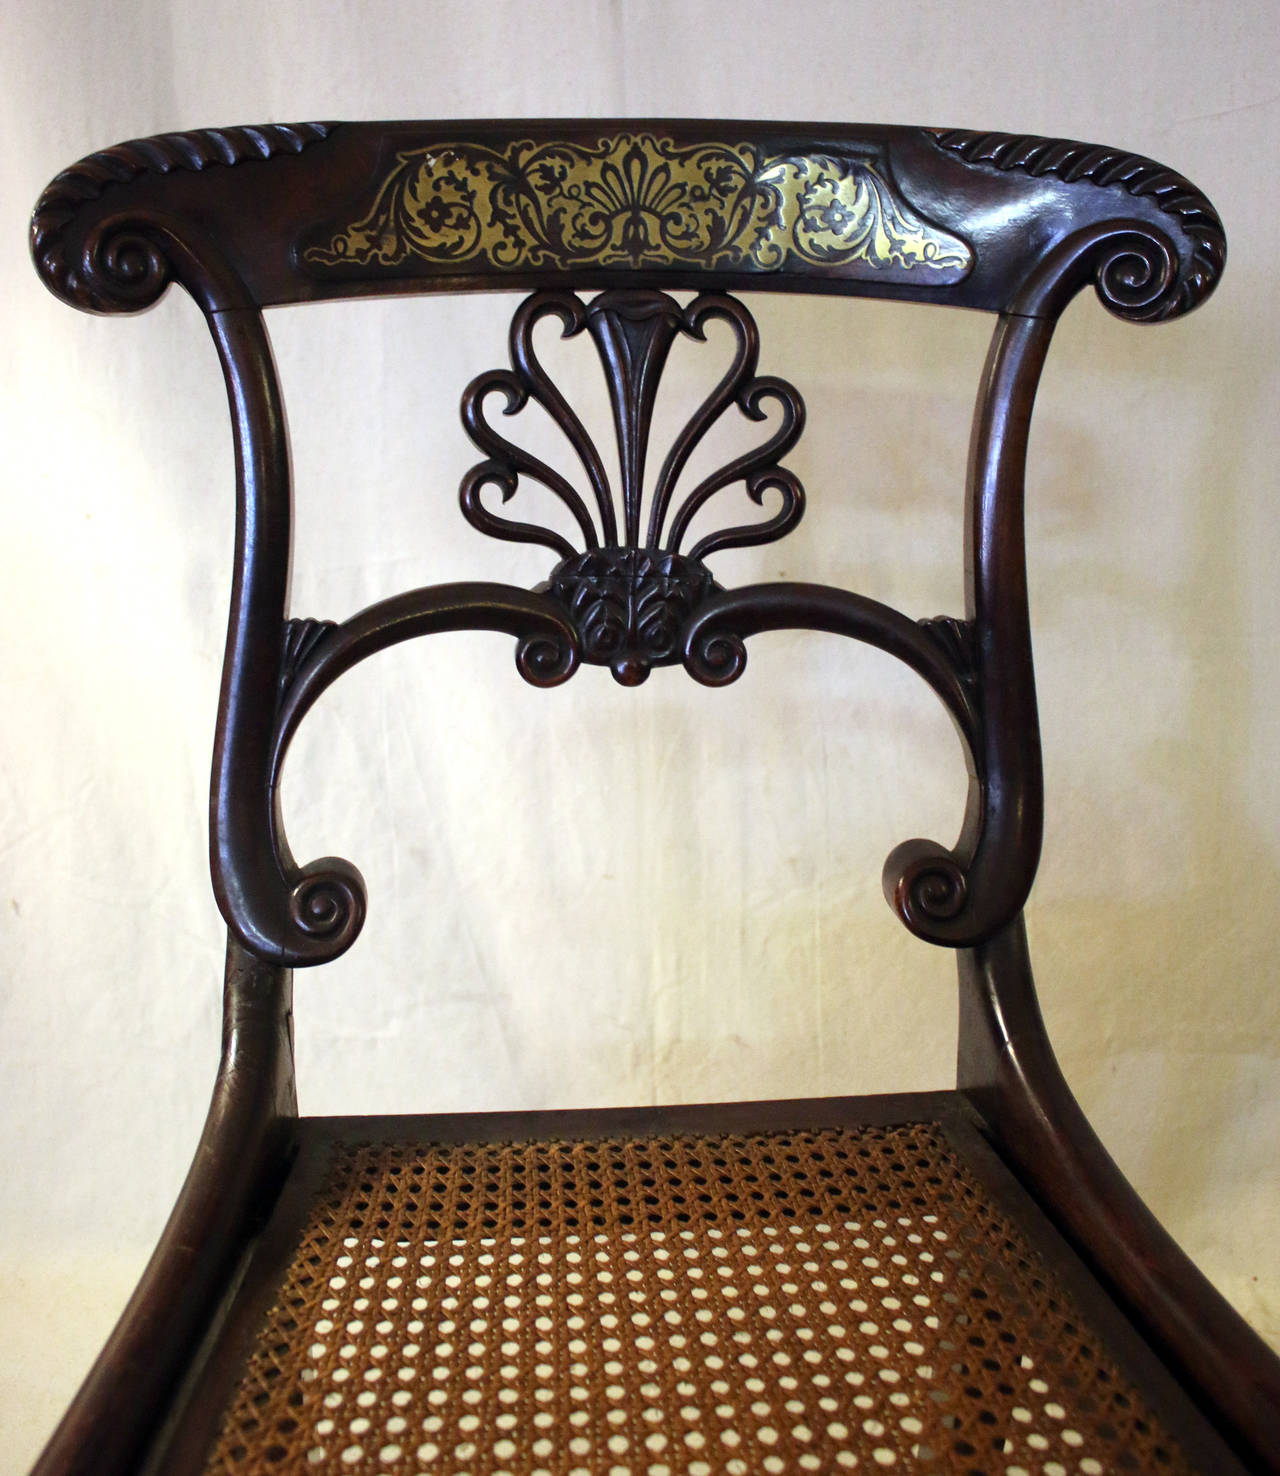 Pair of early 19th century Regency mahogany chairs featuring inlaid Boulle marquetry and caned seats. These are museum quality and are suitable in an entry or a special place with light usage. Very graceful serpentine backs. See measurements below.